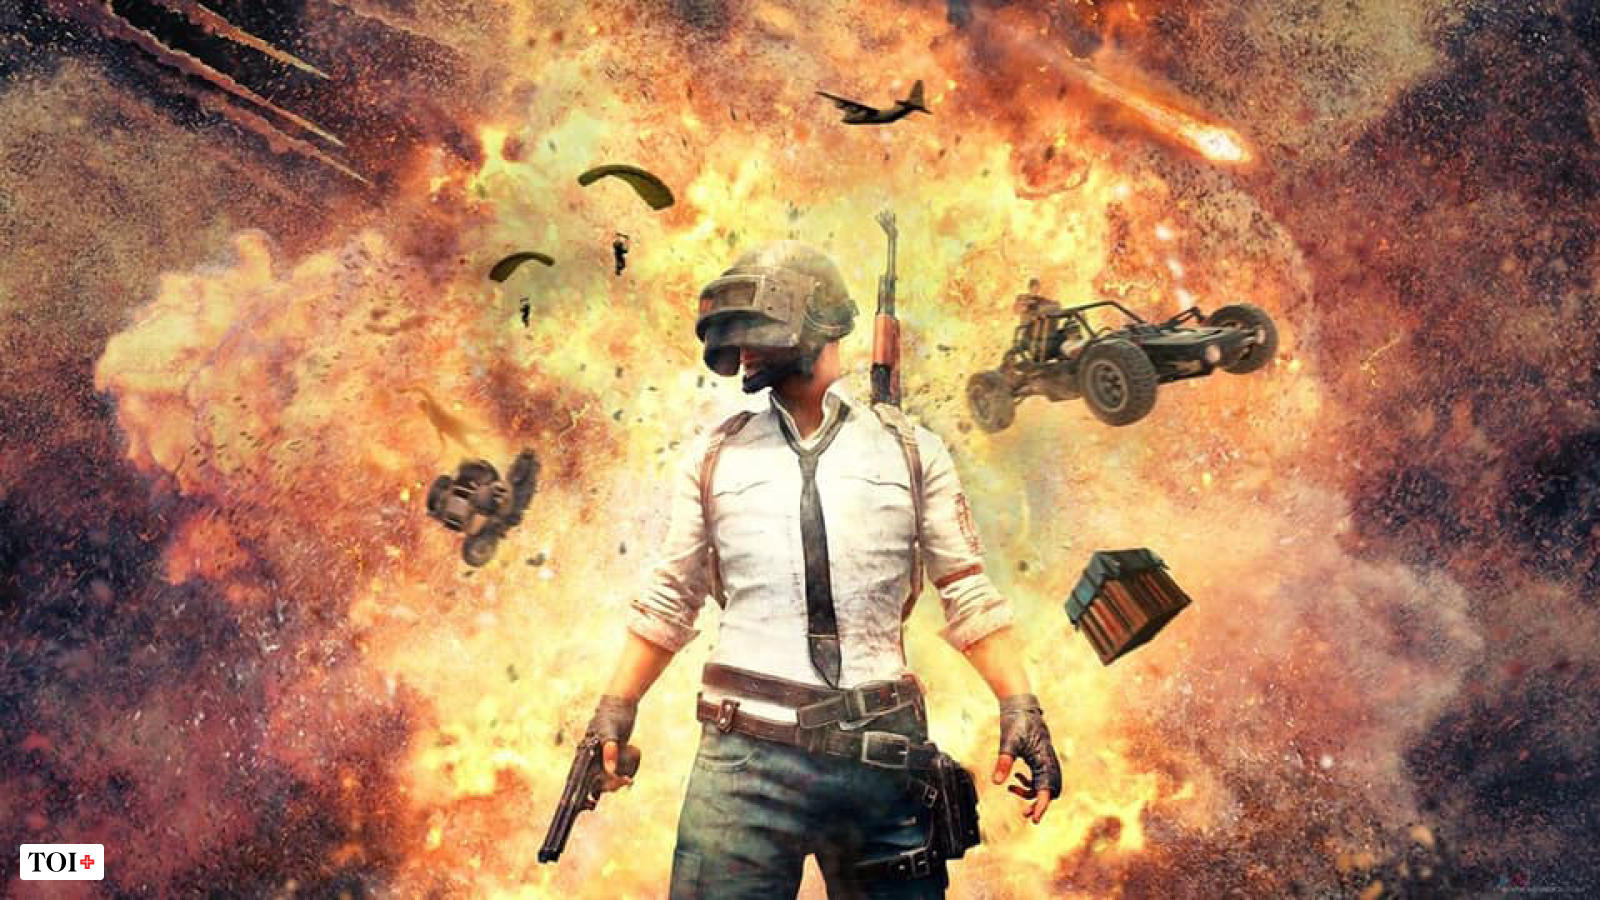 Why the return of PUBG should worry parents | India News - Times ...